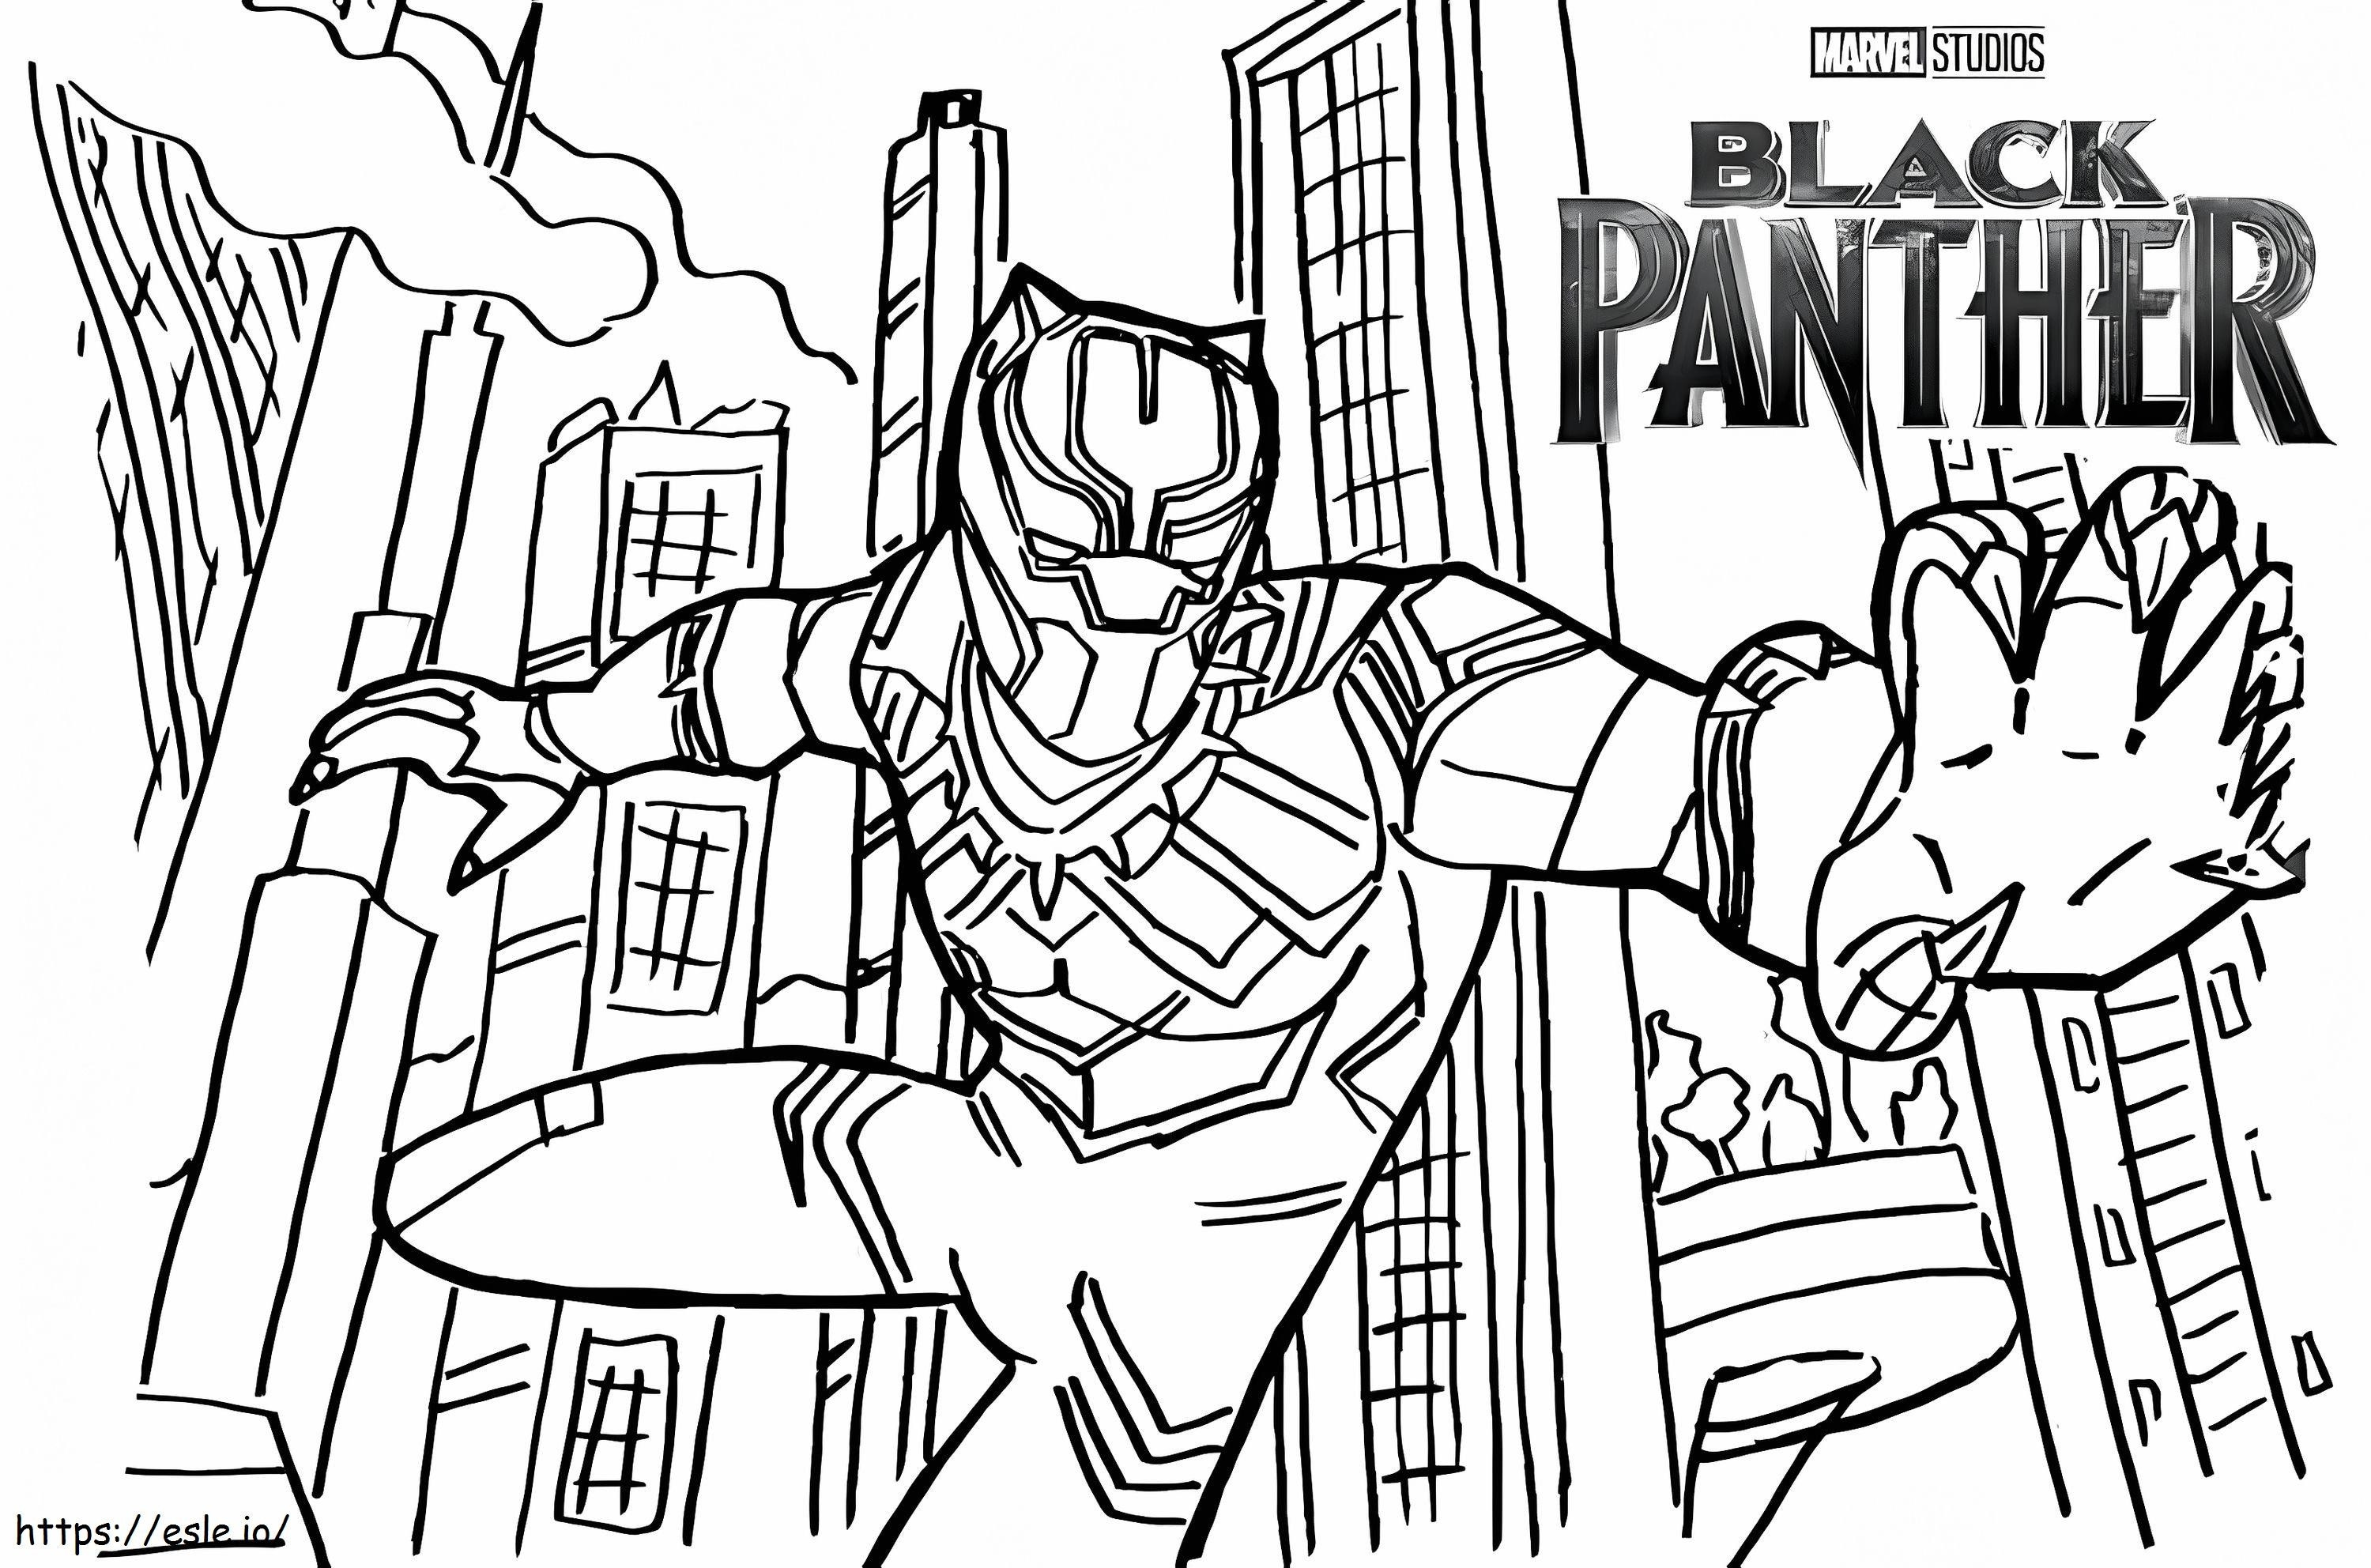 Black Panther In The City coloring page